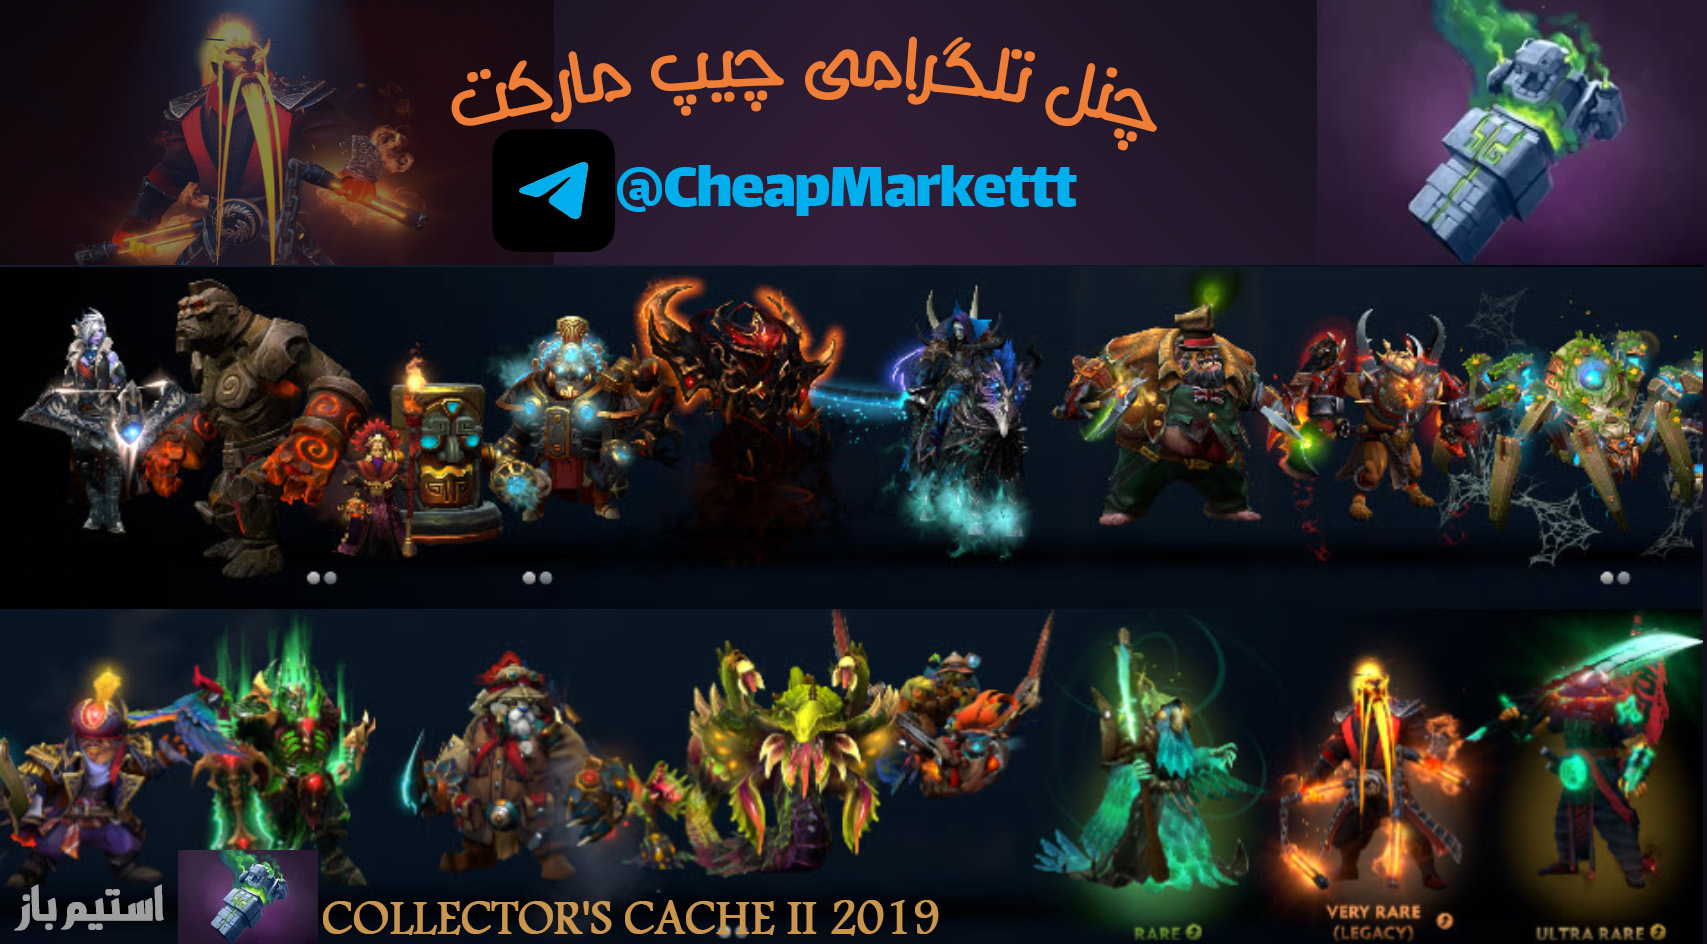 Collector's Cache II 2019